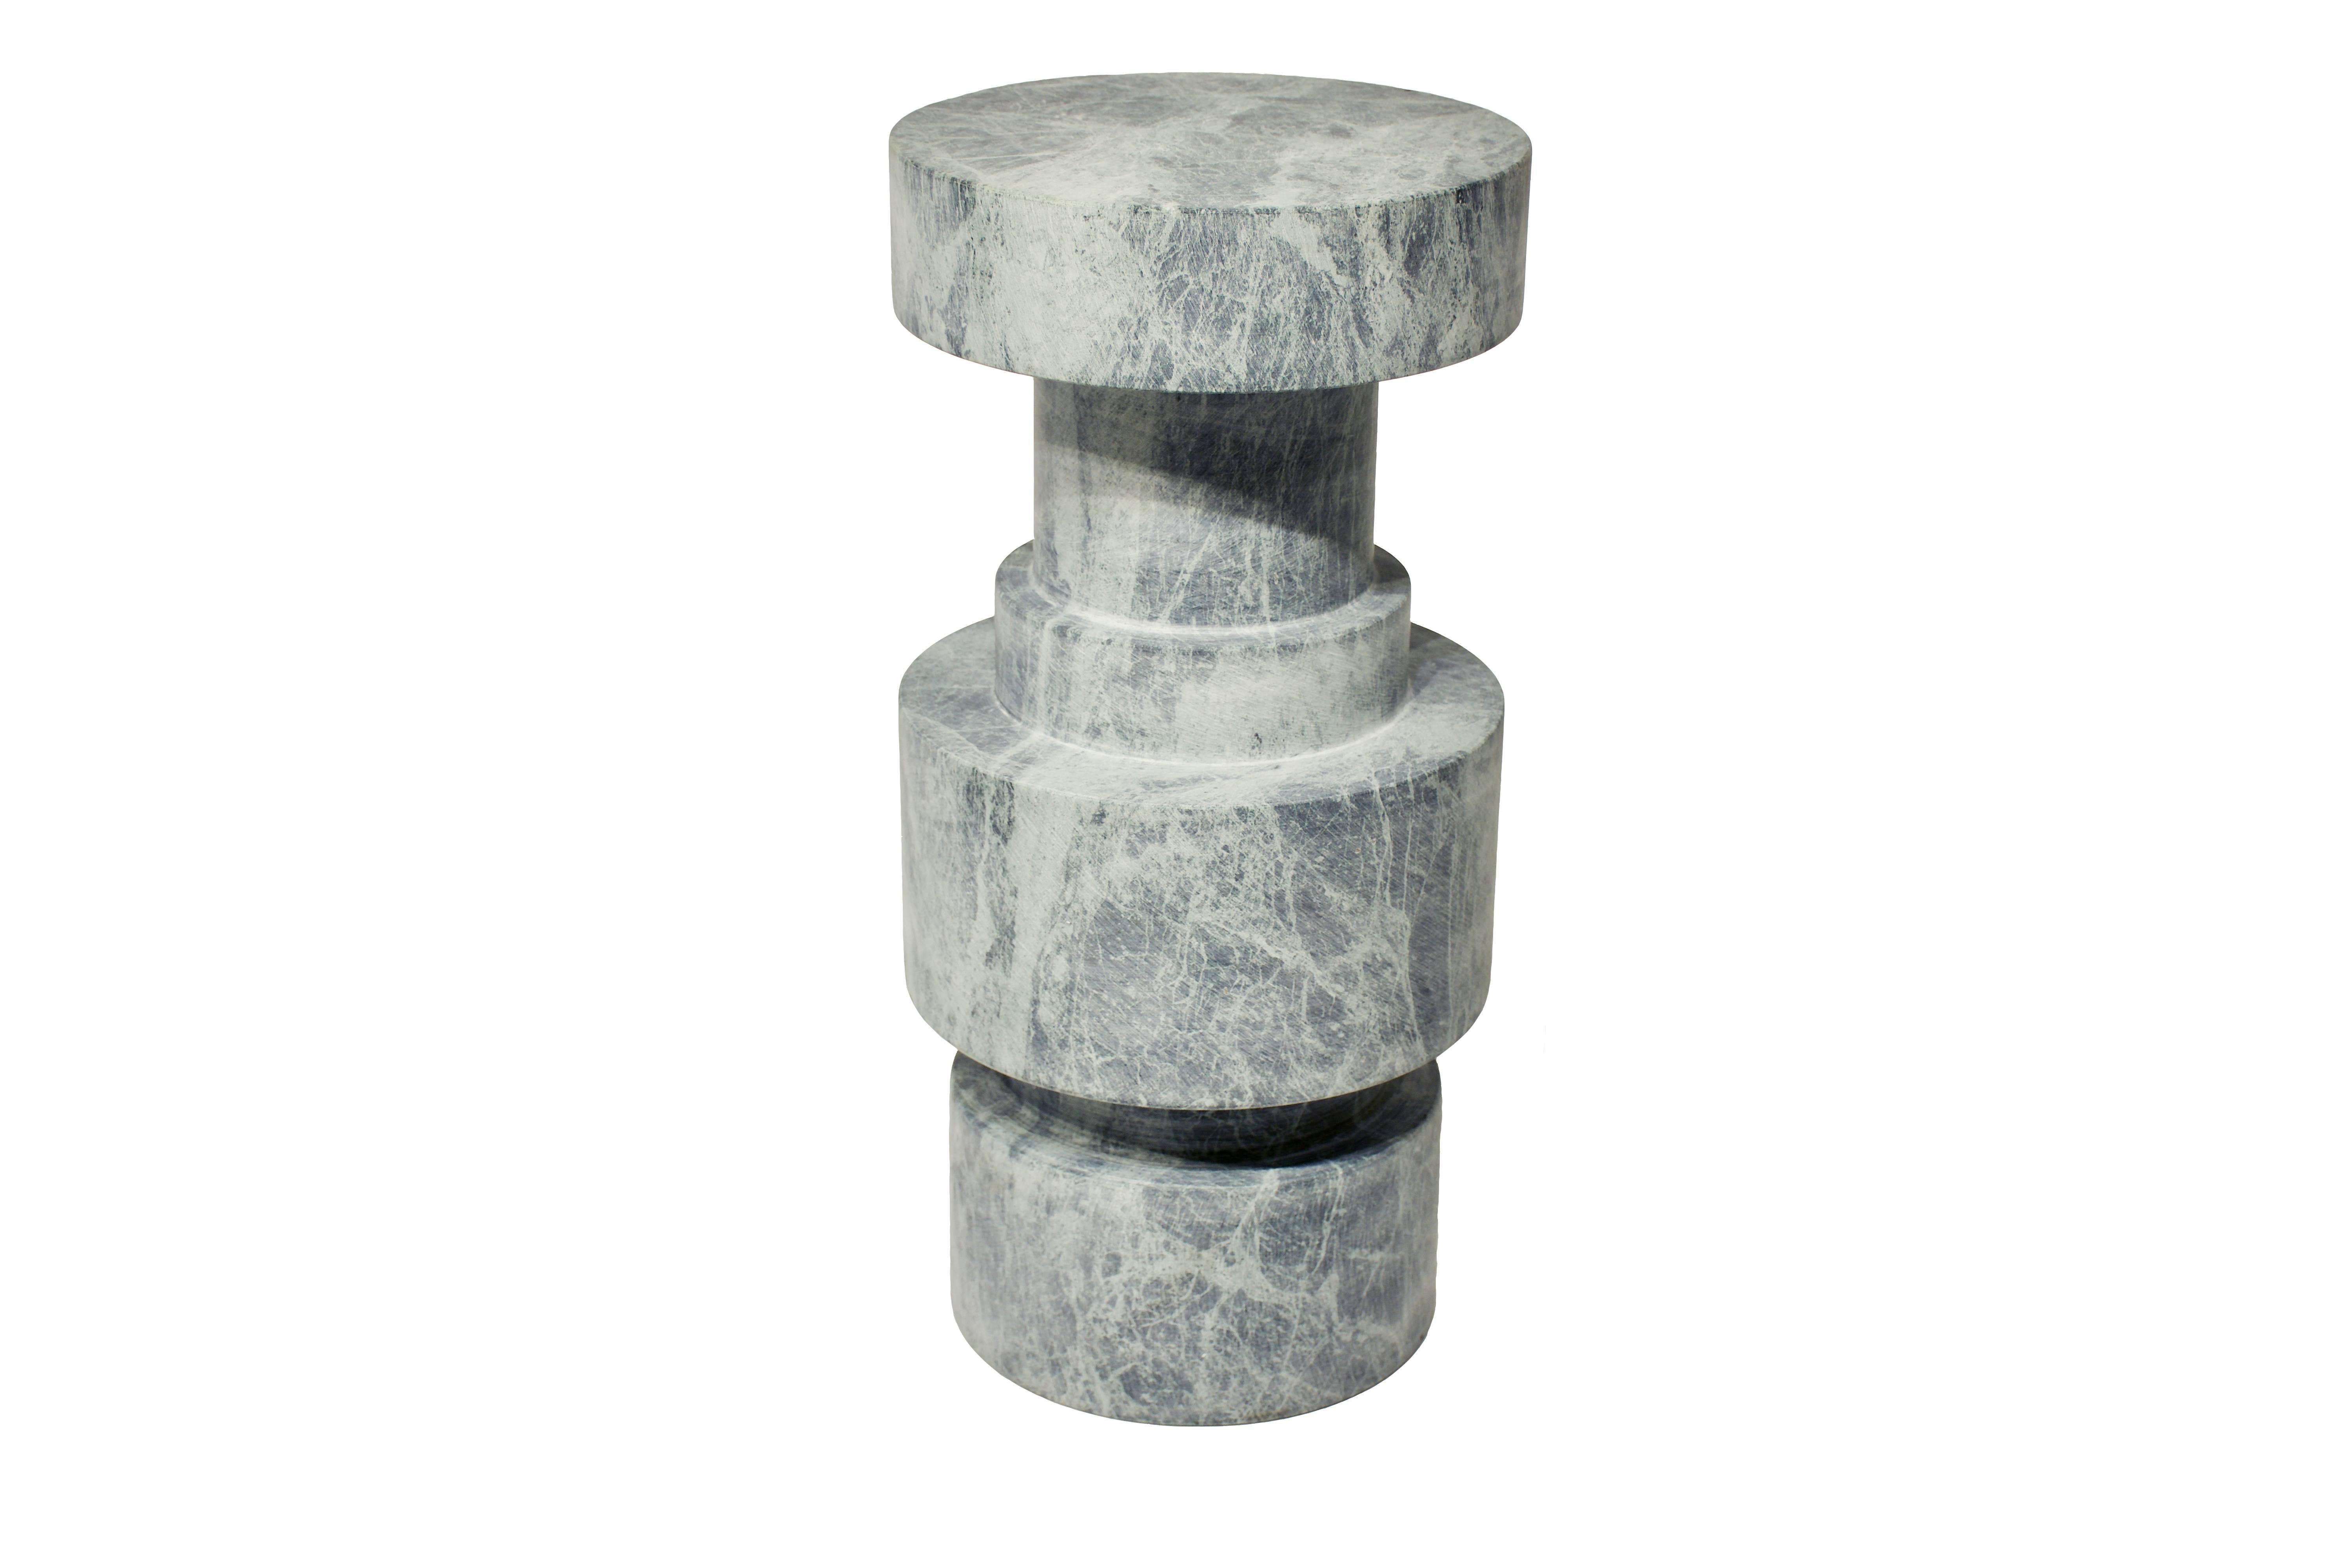 Brendan bass designed architectural end table executed in honed verde alpi marble
by Italian artisans.